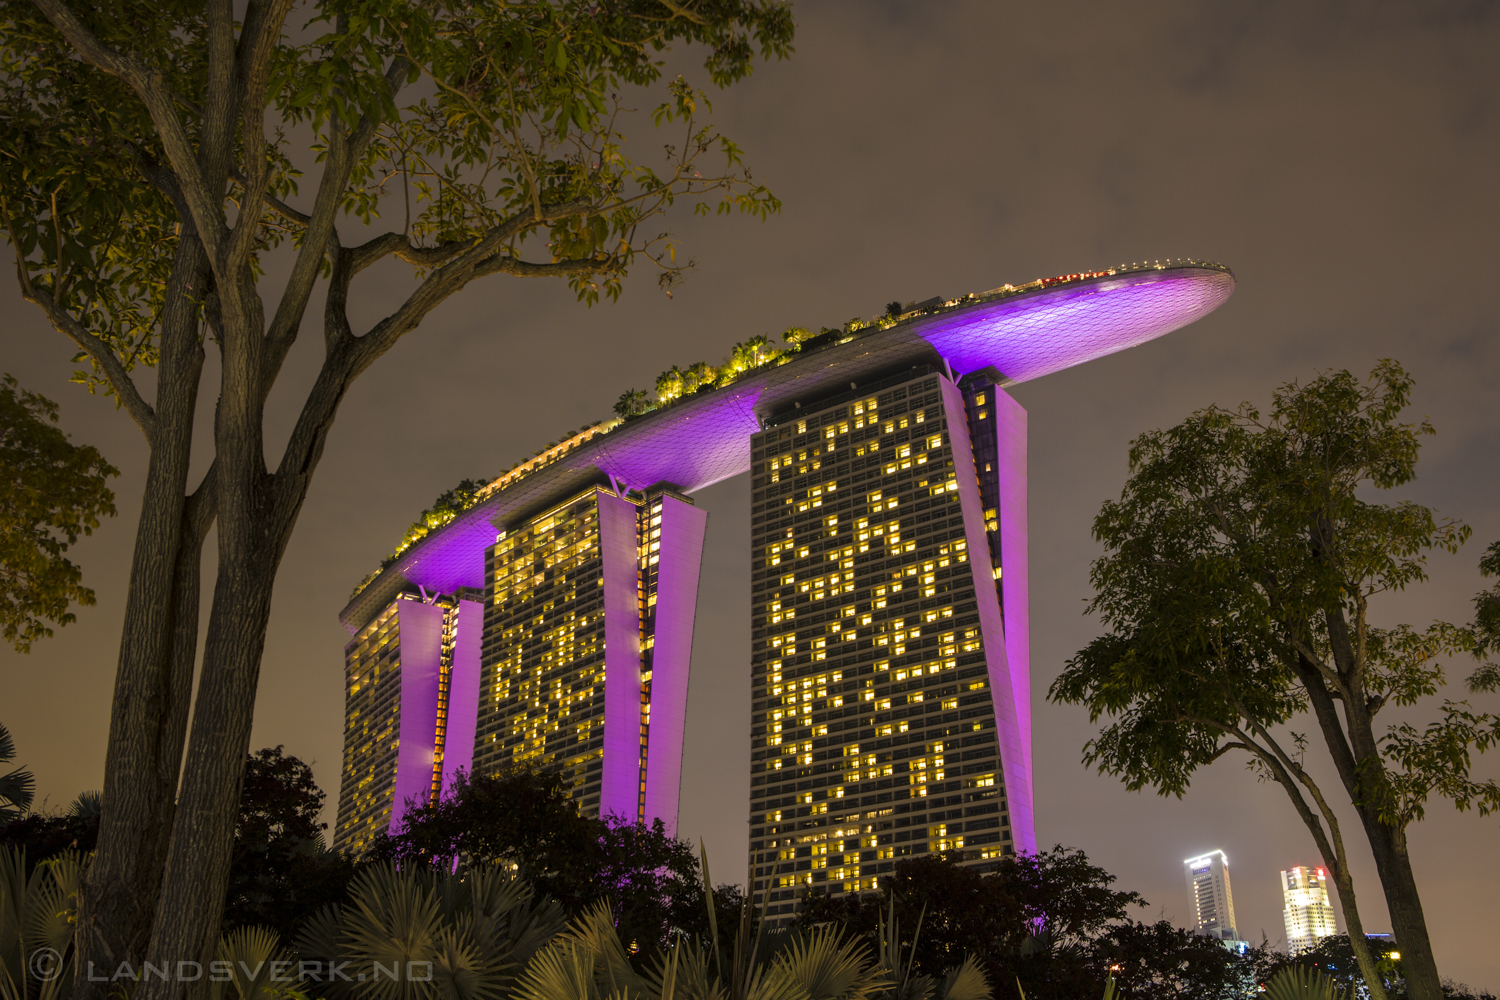 And of course in pink. Marina Bay Sands, Singapore. 

(Canon EOS 5D Mark III / Canon EF 24-70mm f/2.8 L USM)